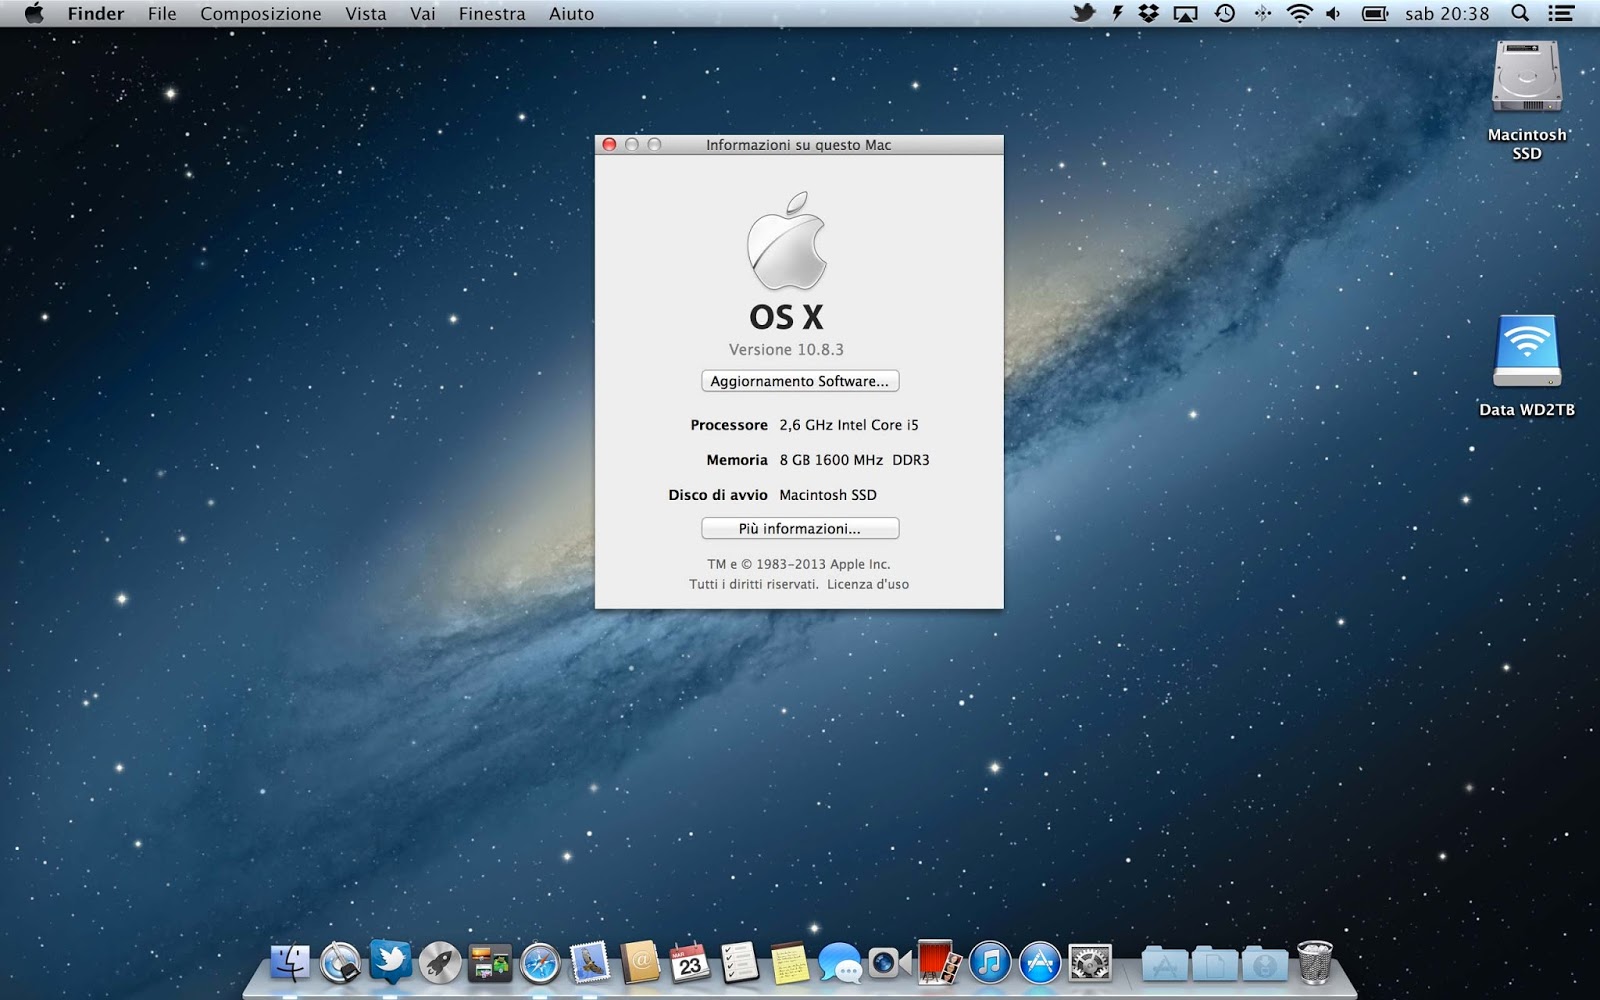 this update requires mac os x version 10.6